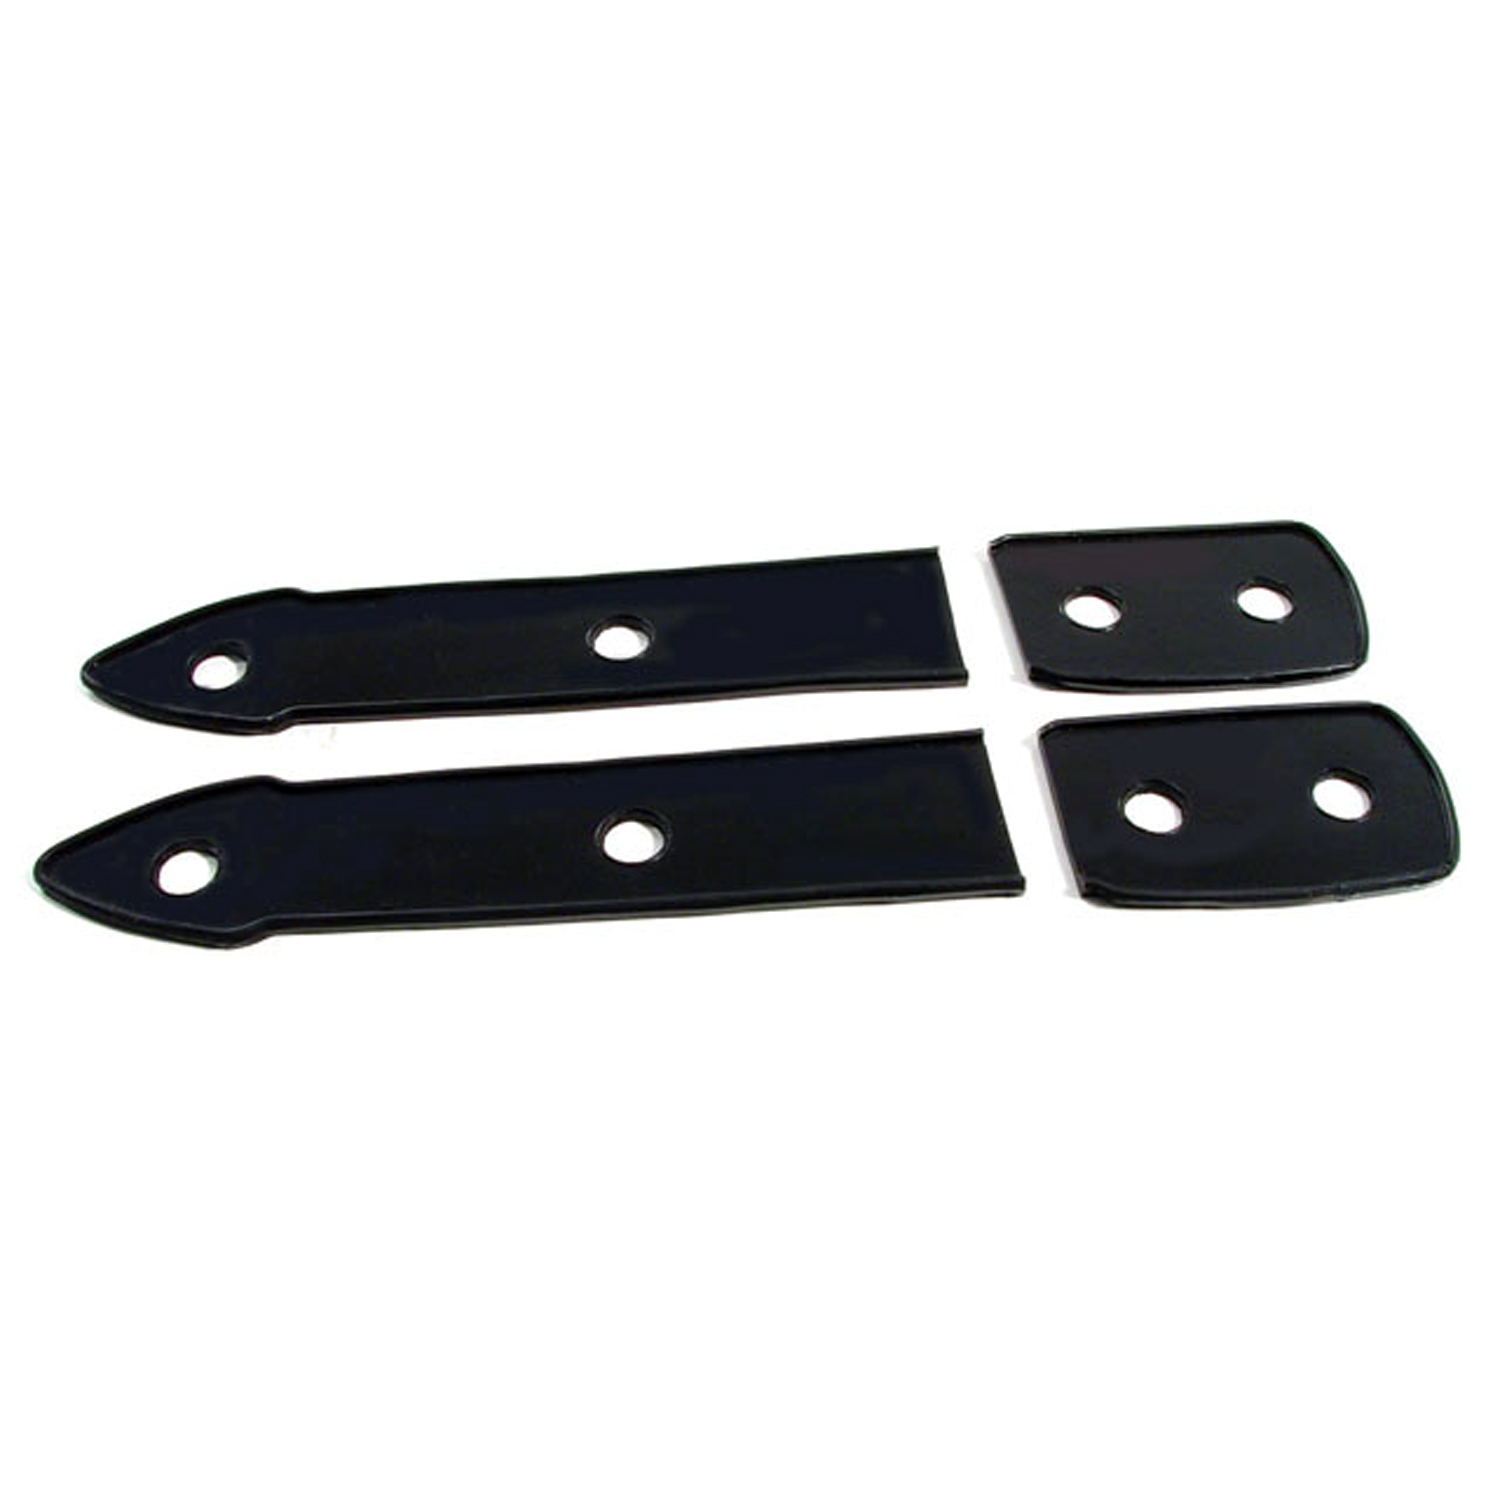 1937 Buick Limited Series 90 Trunk Hinge Pads.  1-5/8 wide X 8-3/8 long.  4-Piece Set-MP 335-B